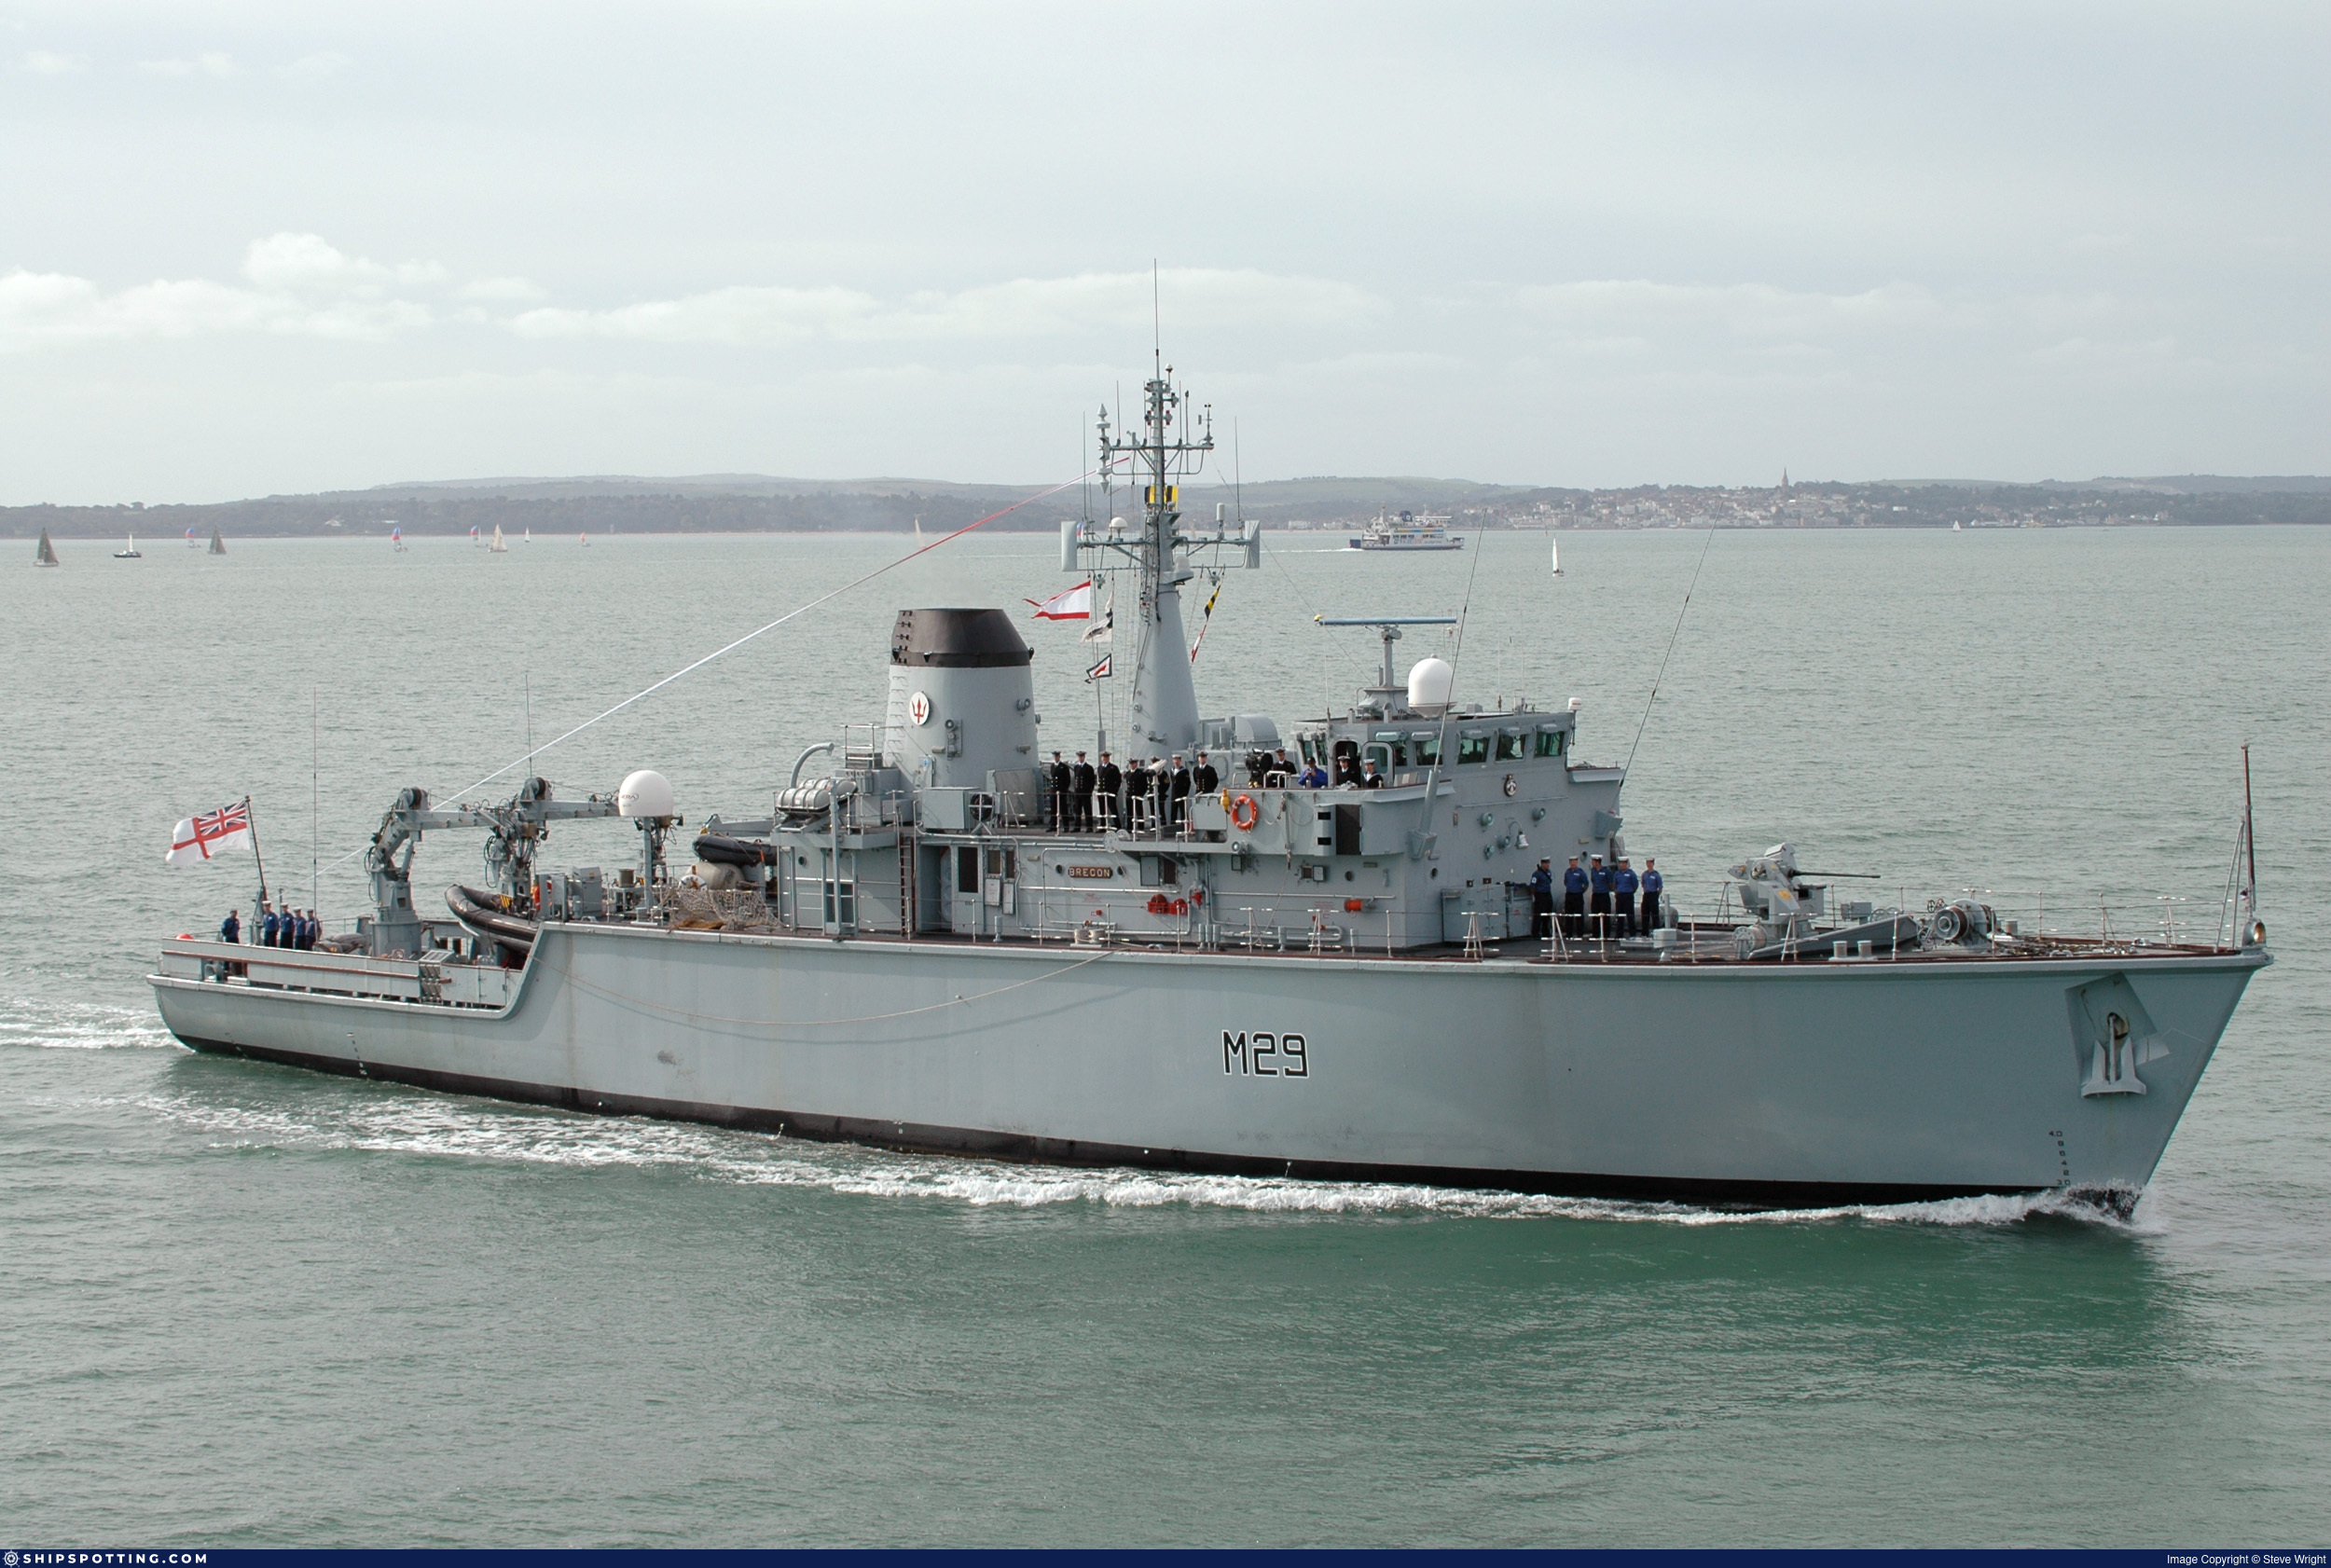 Photograph 10X15 Royal Navy Hunt Class Minesweeper HMS BRECON M29  6X4 